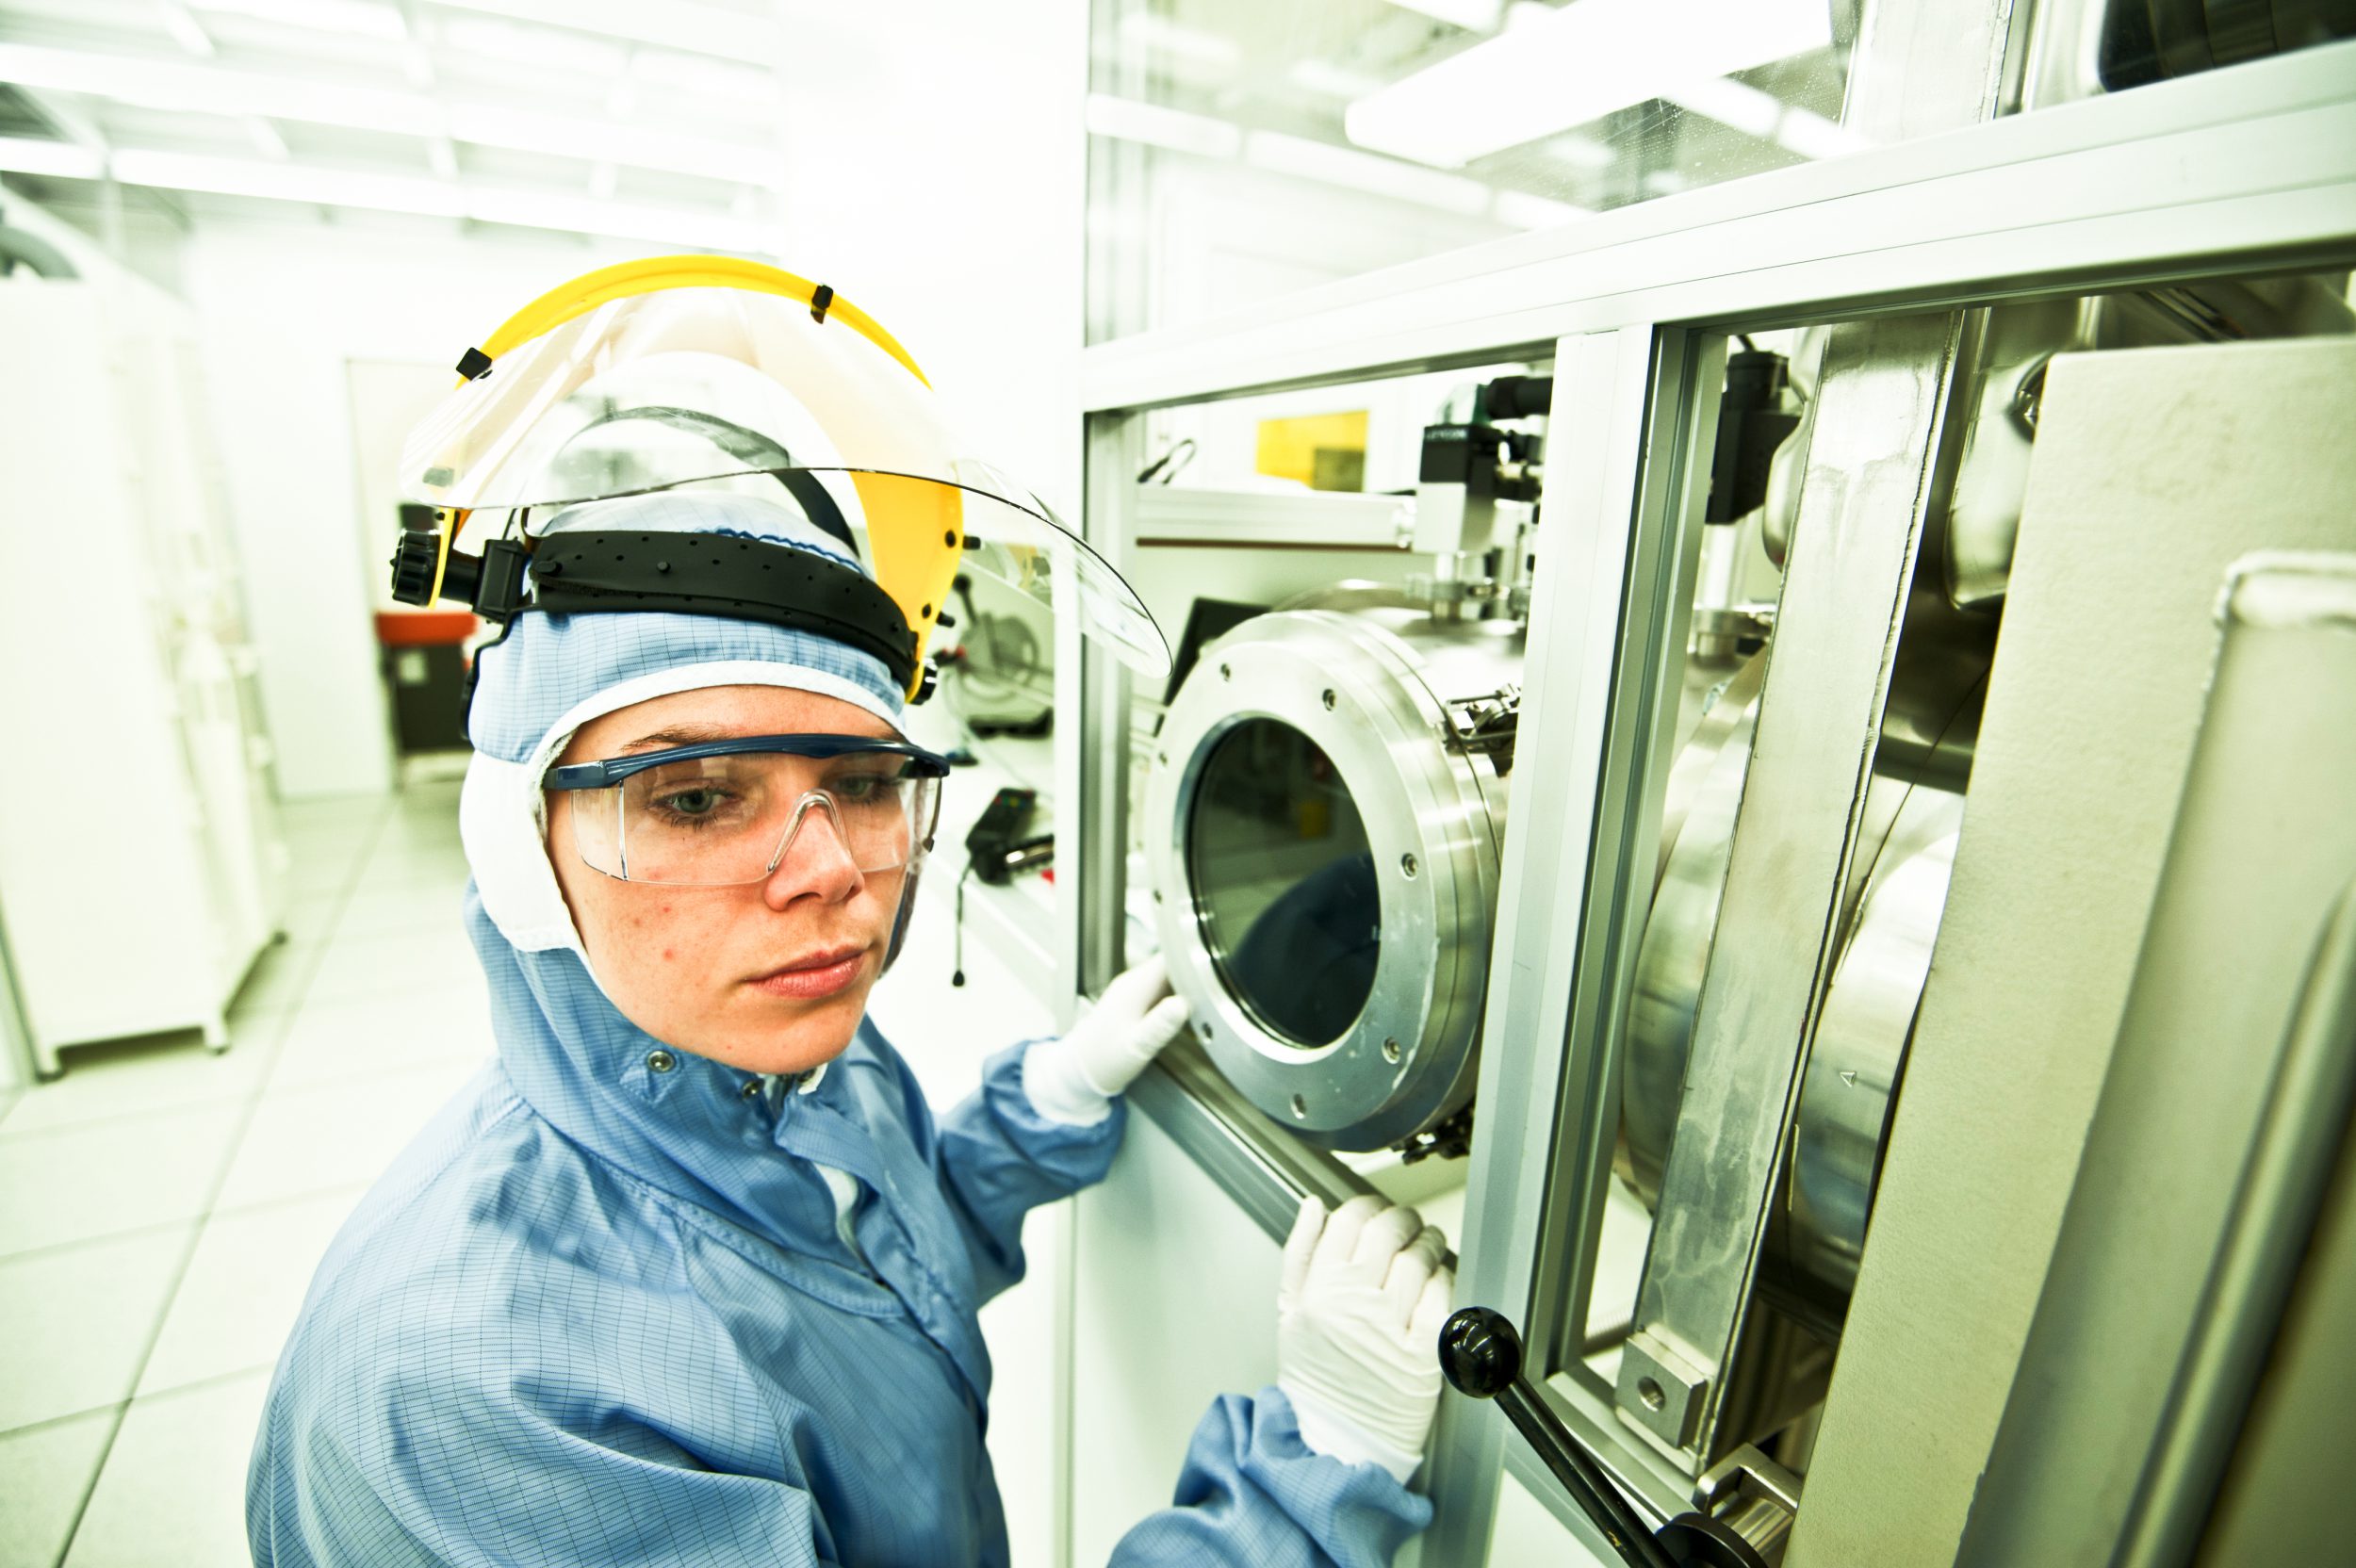 medical device regulation being tested by Woman Scientist Pose in Cleanroom/Laboratory